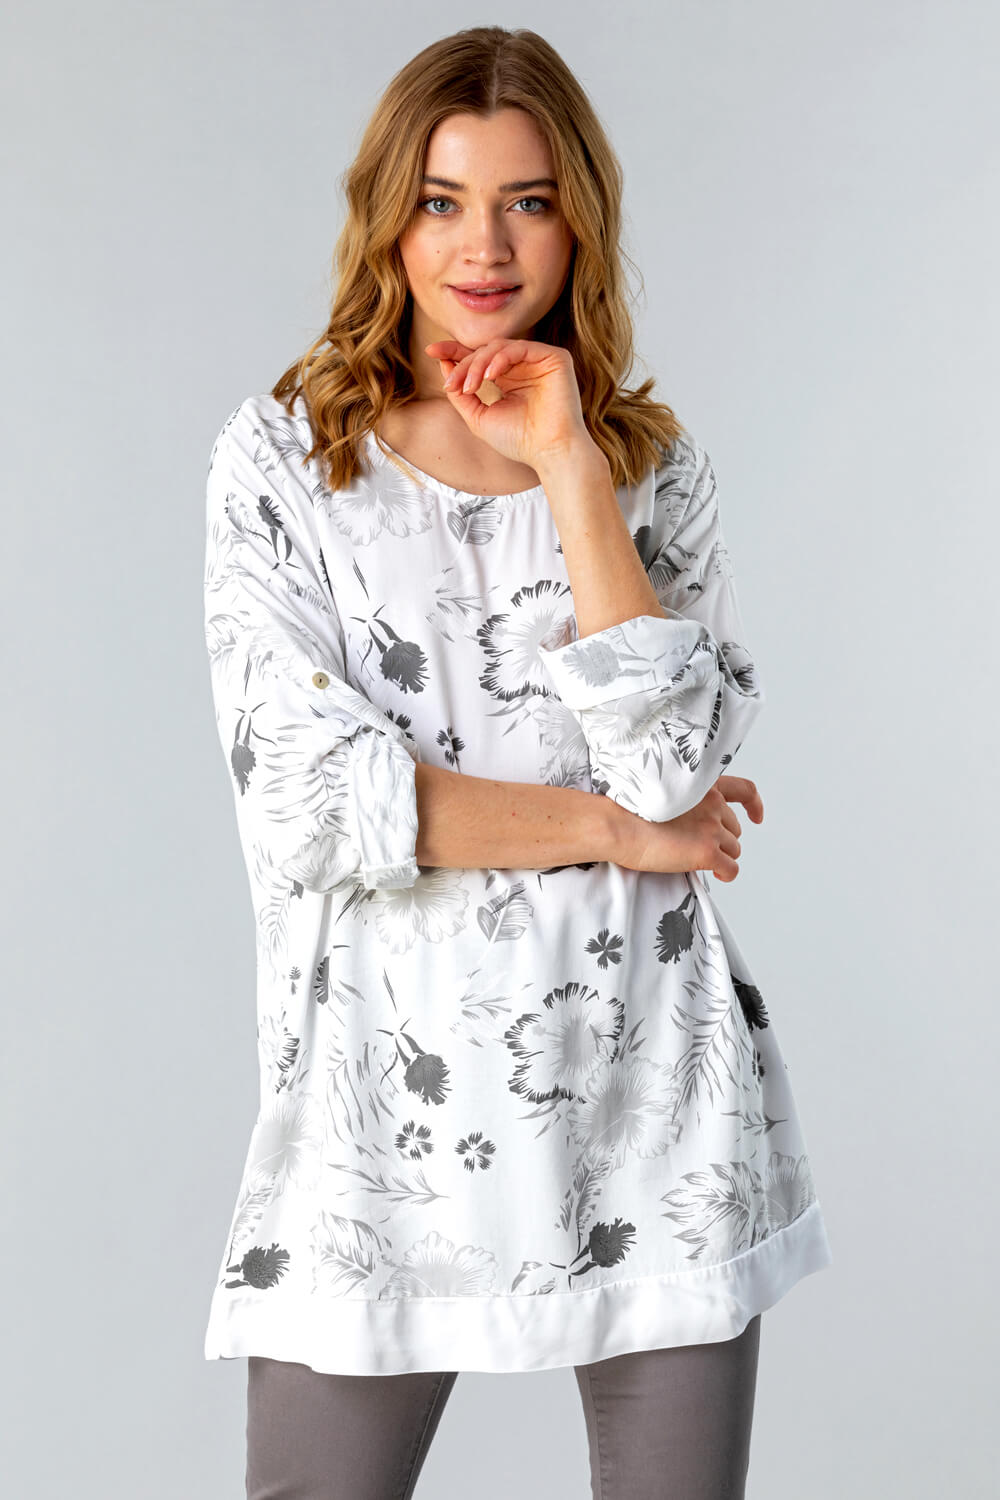 White Floral Print Longline Tunic Top, Image 3 of 4